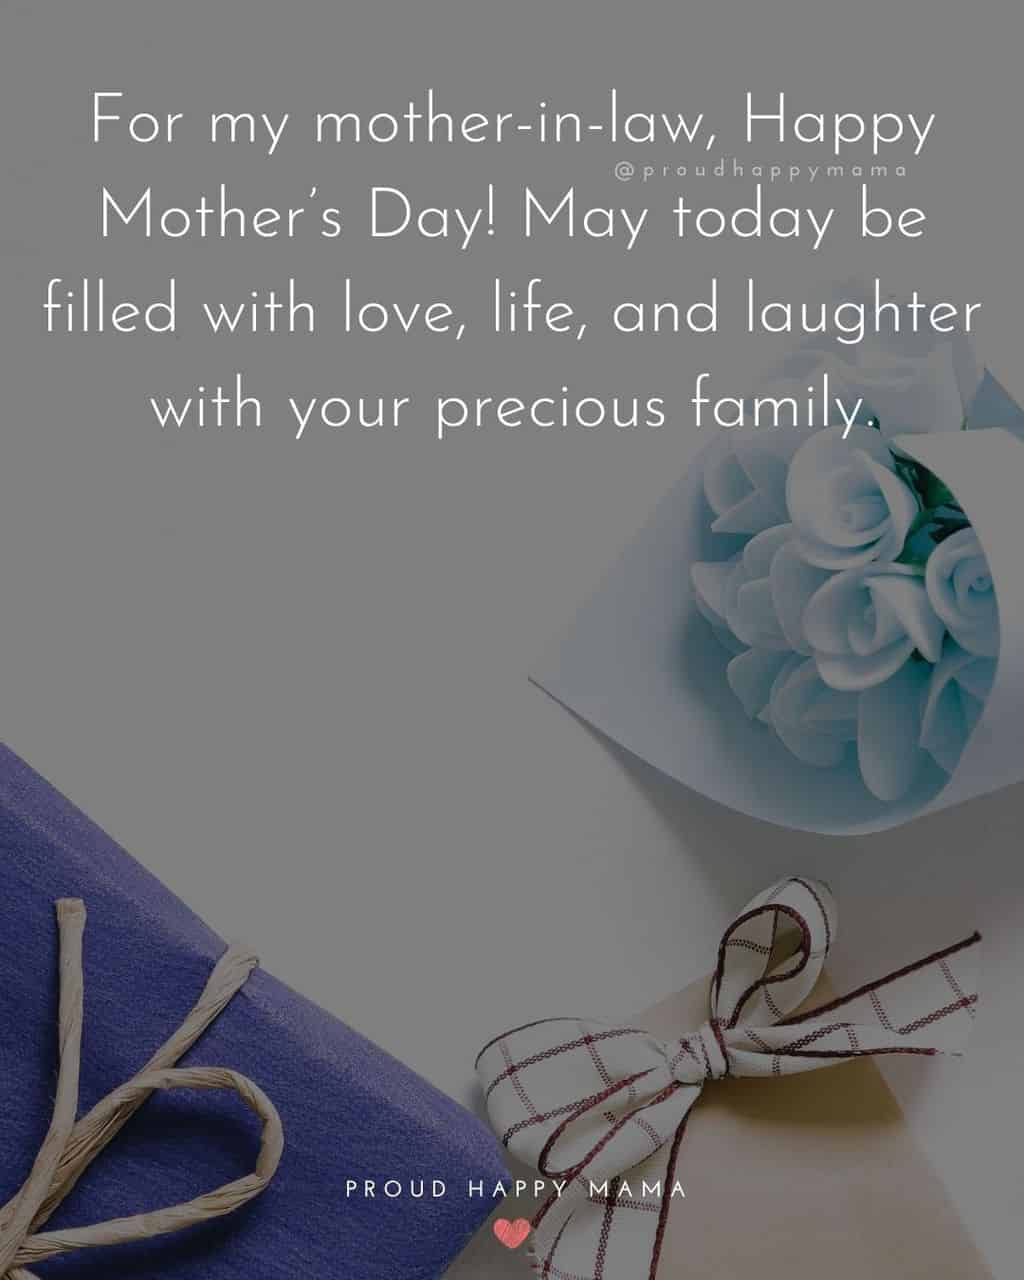 Happy Mothers Day Quotes For Mother In Law - For my mother in law, Happy Mother’s Day! May today be filled with love, life, and laughter